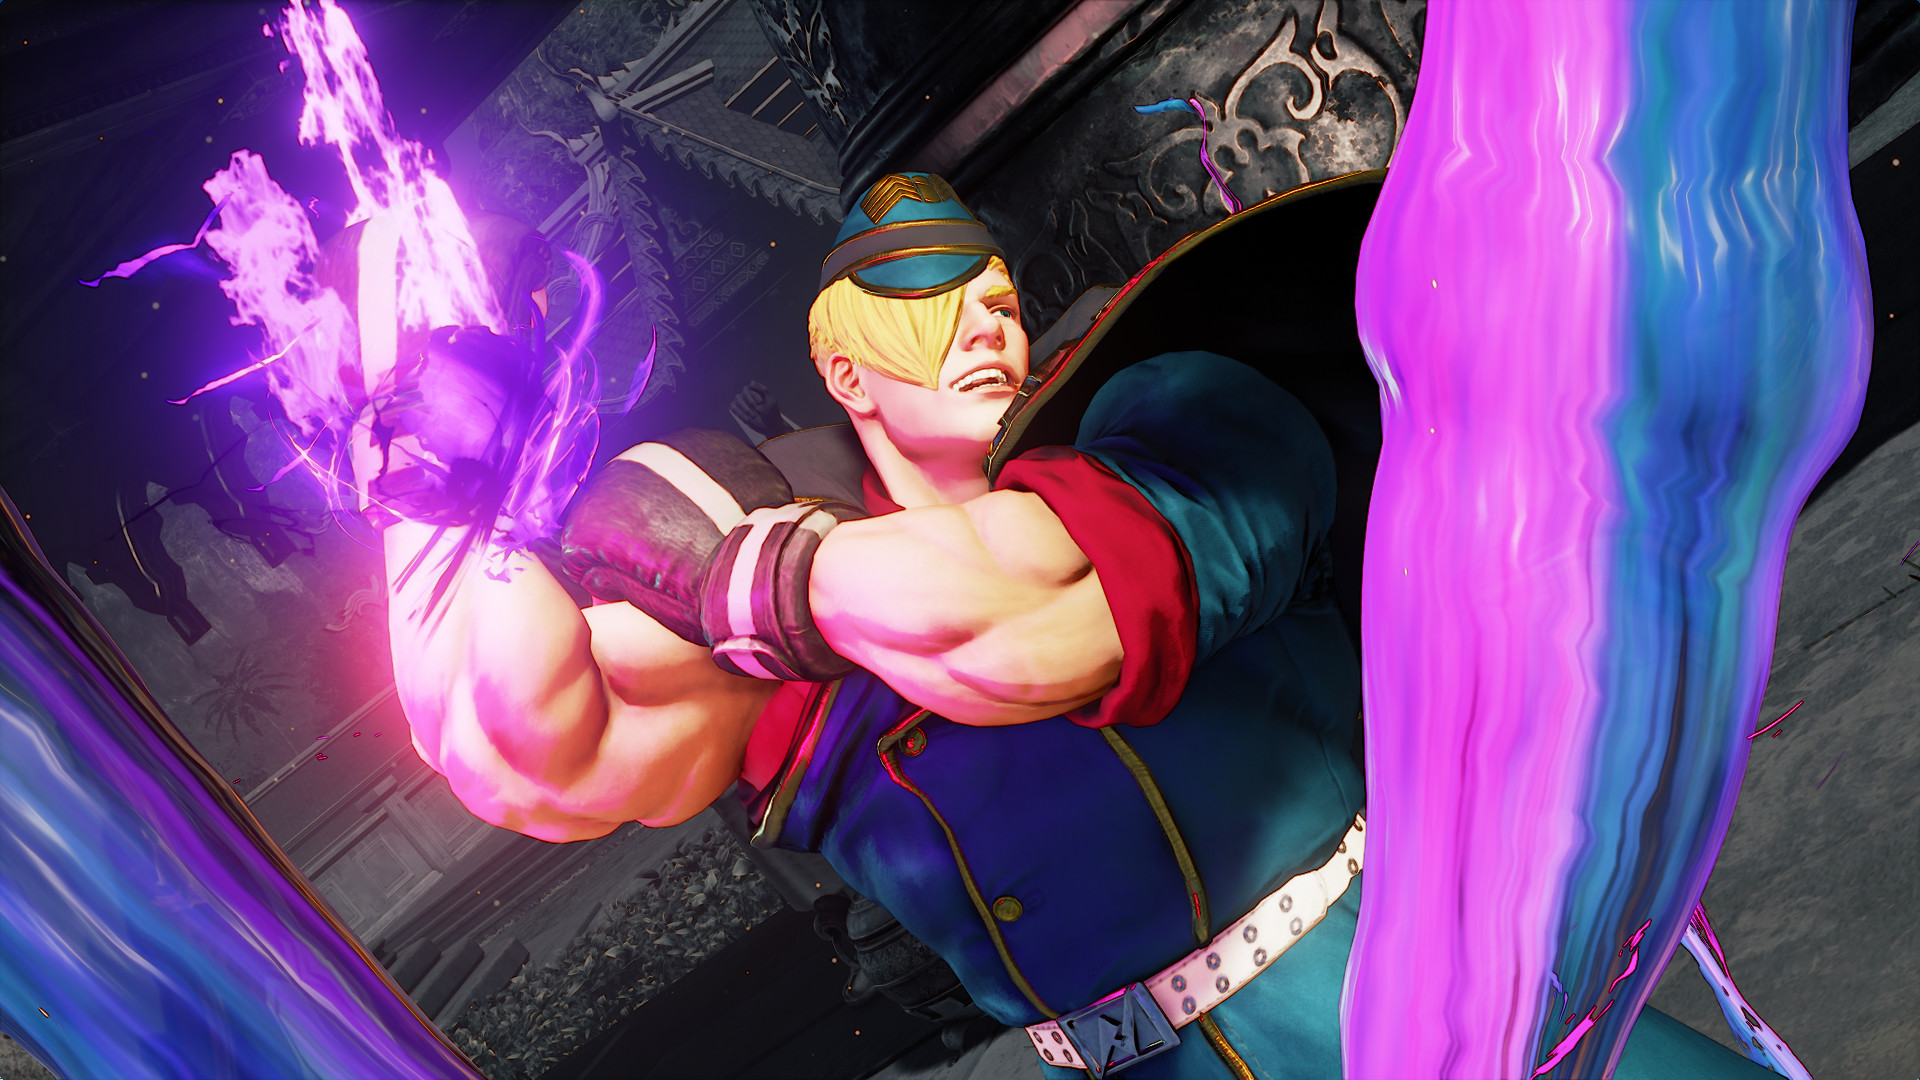 Street Fighter 5 PC Benchmark Tool is now available for download